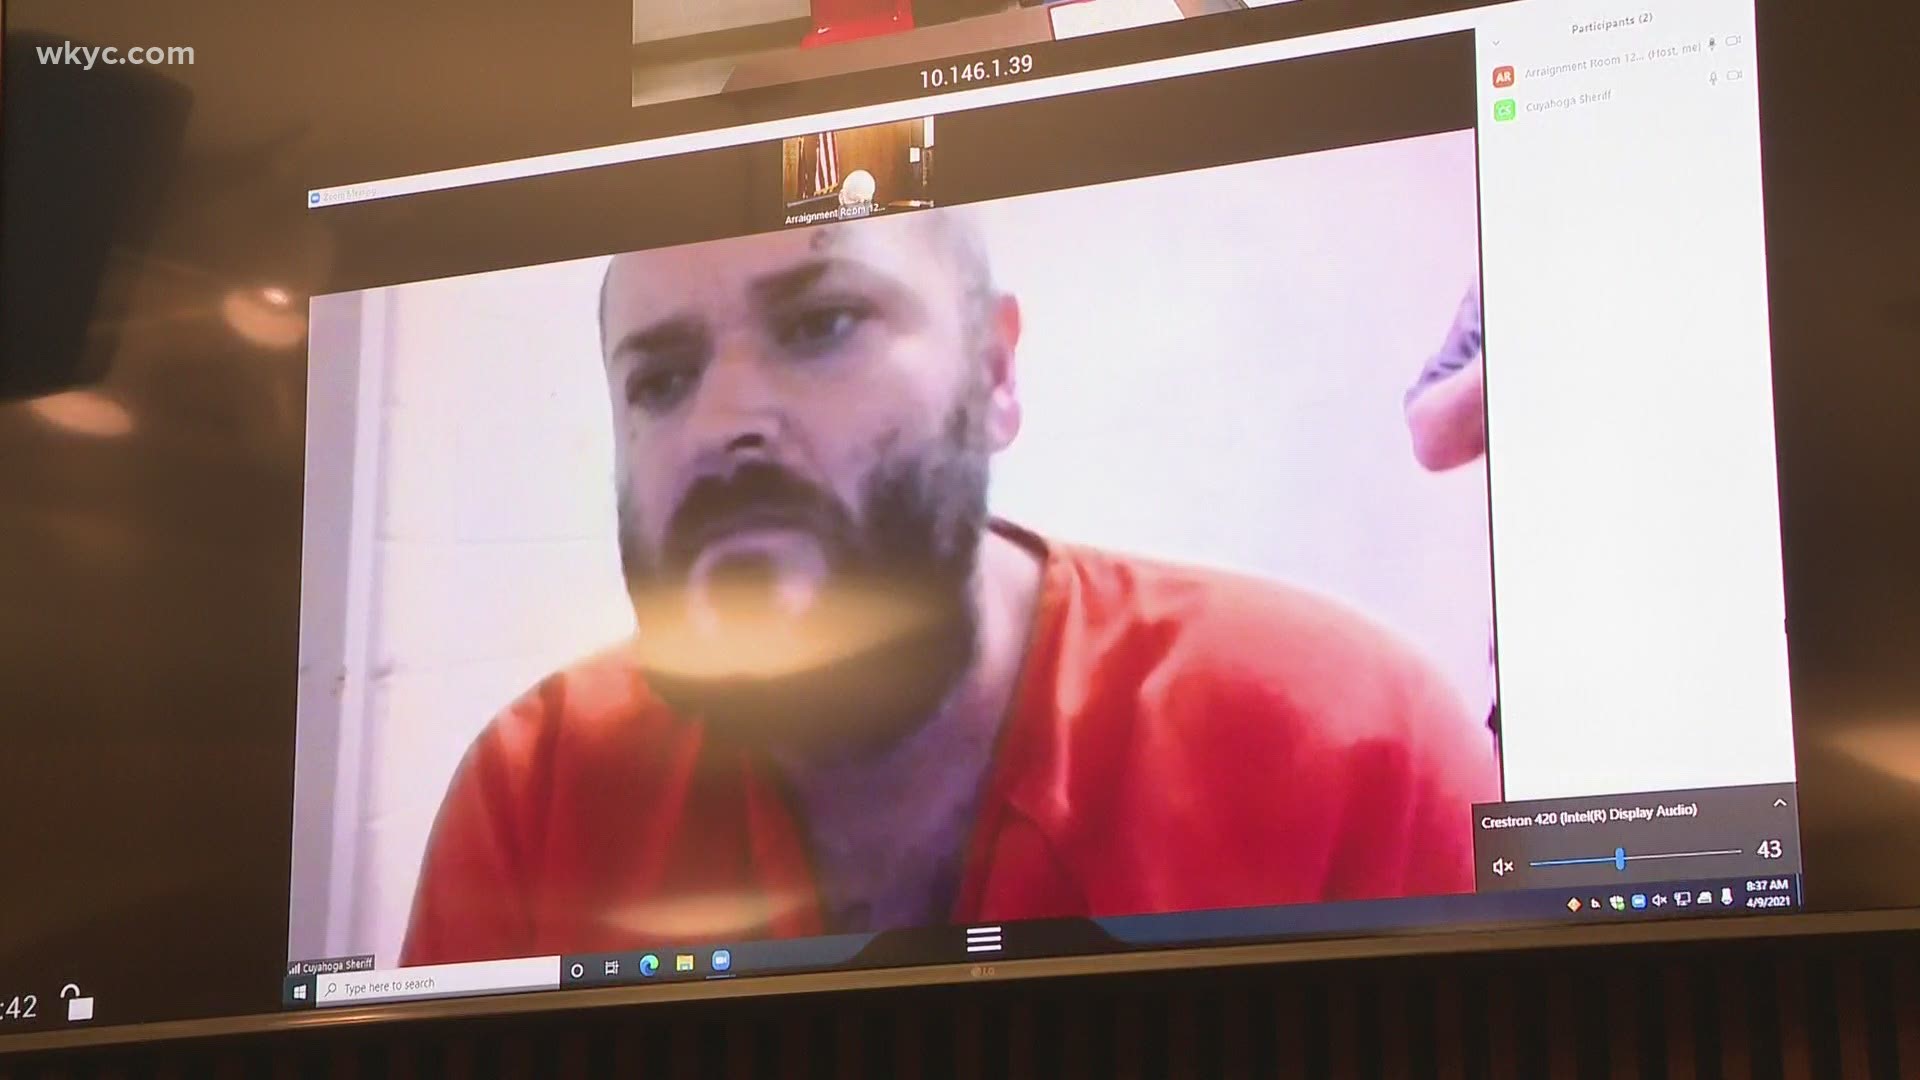 Matthew Ponomarenko is being held on $5 million bond after pleading not guilty to charges connected to the murder of his 5-year-old son, Jax.